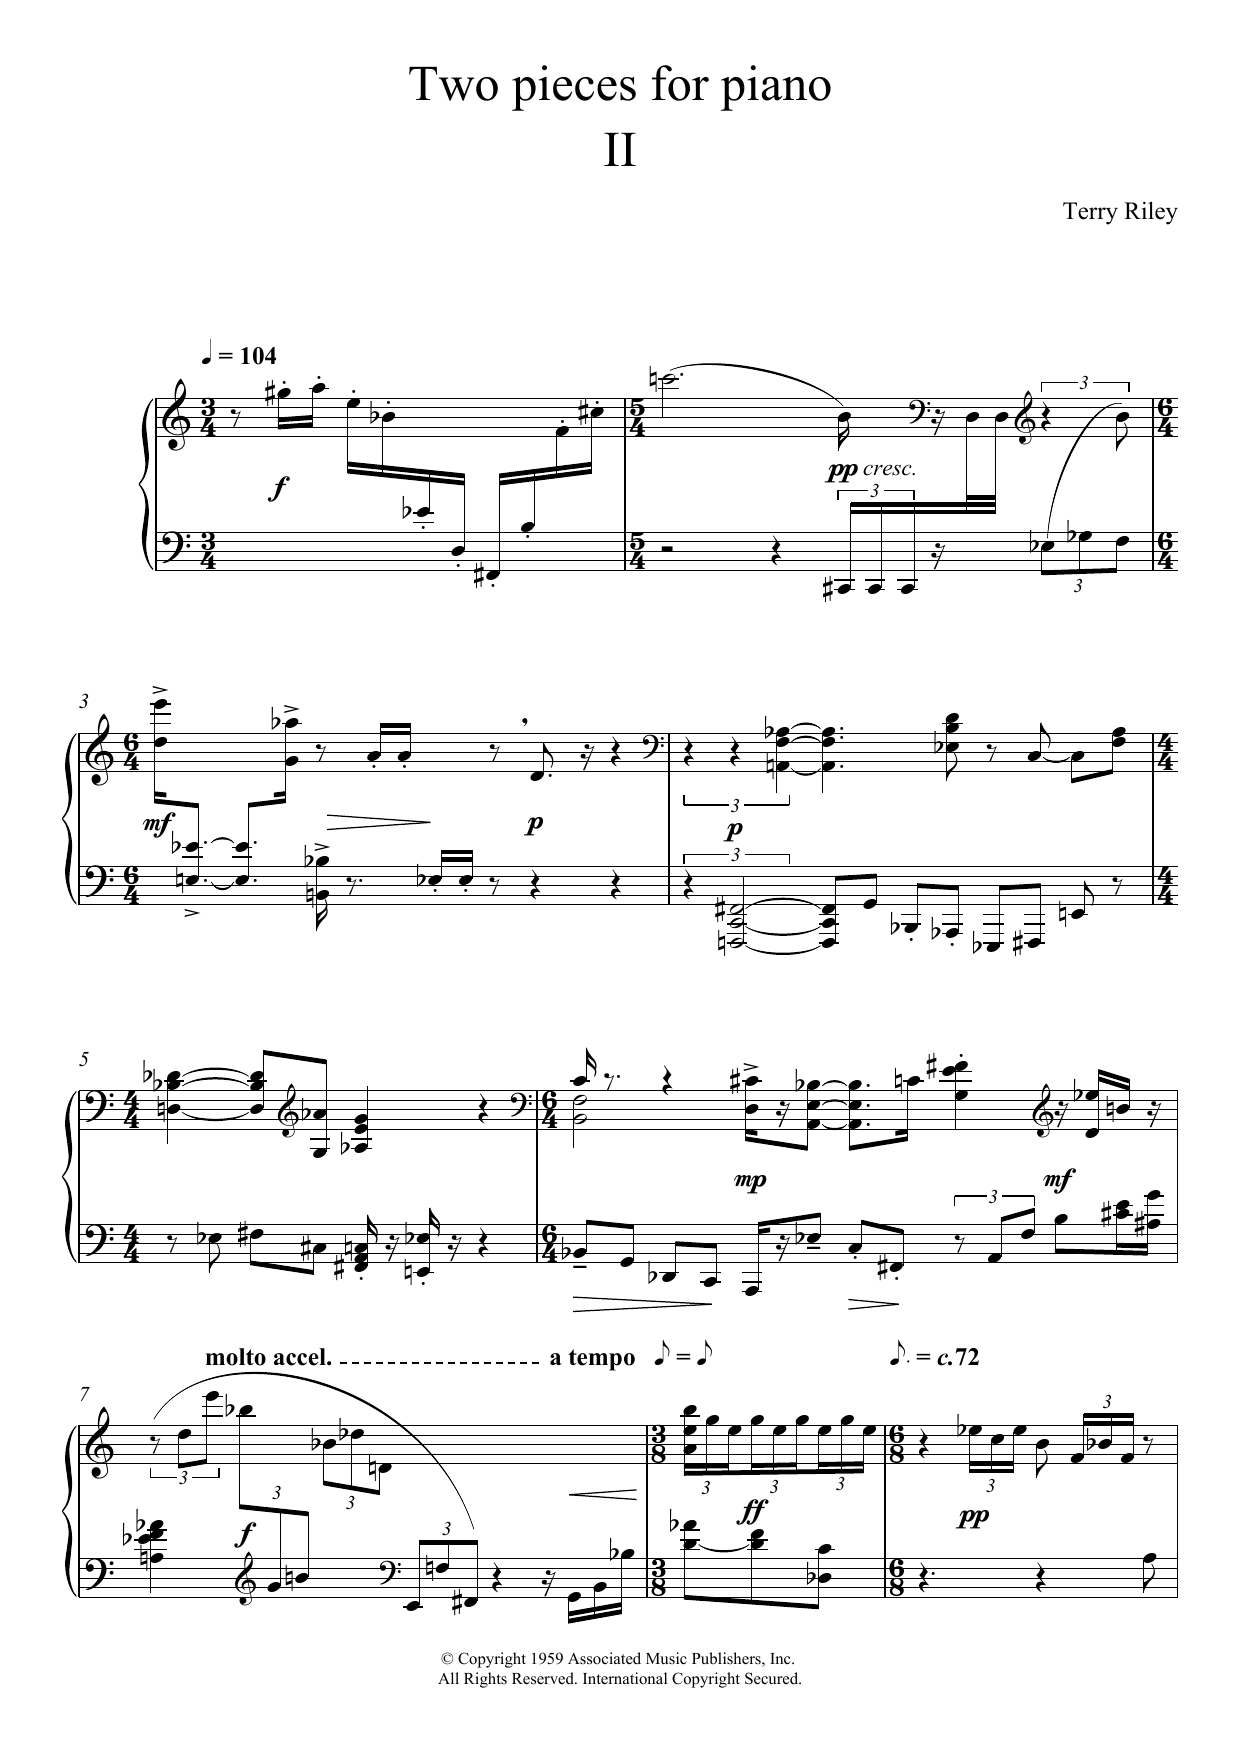 Download Terry Riley Two Pieces For Piano - II. Sheet Music